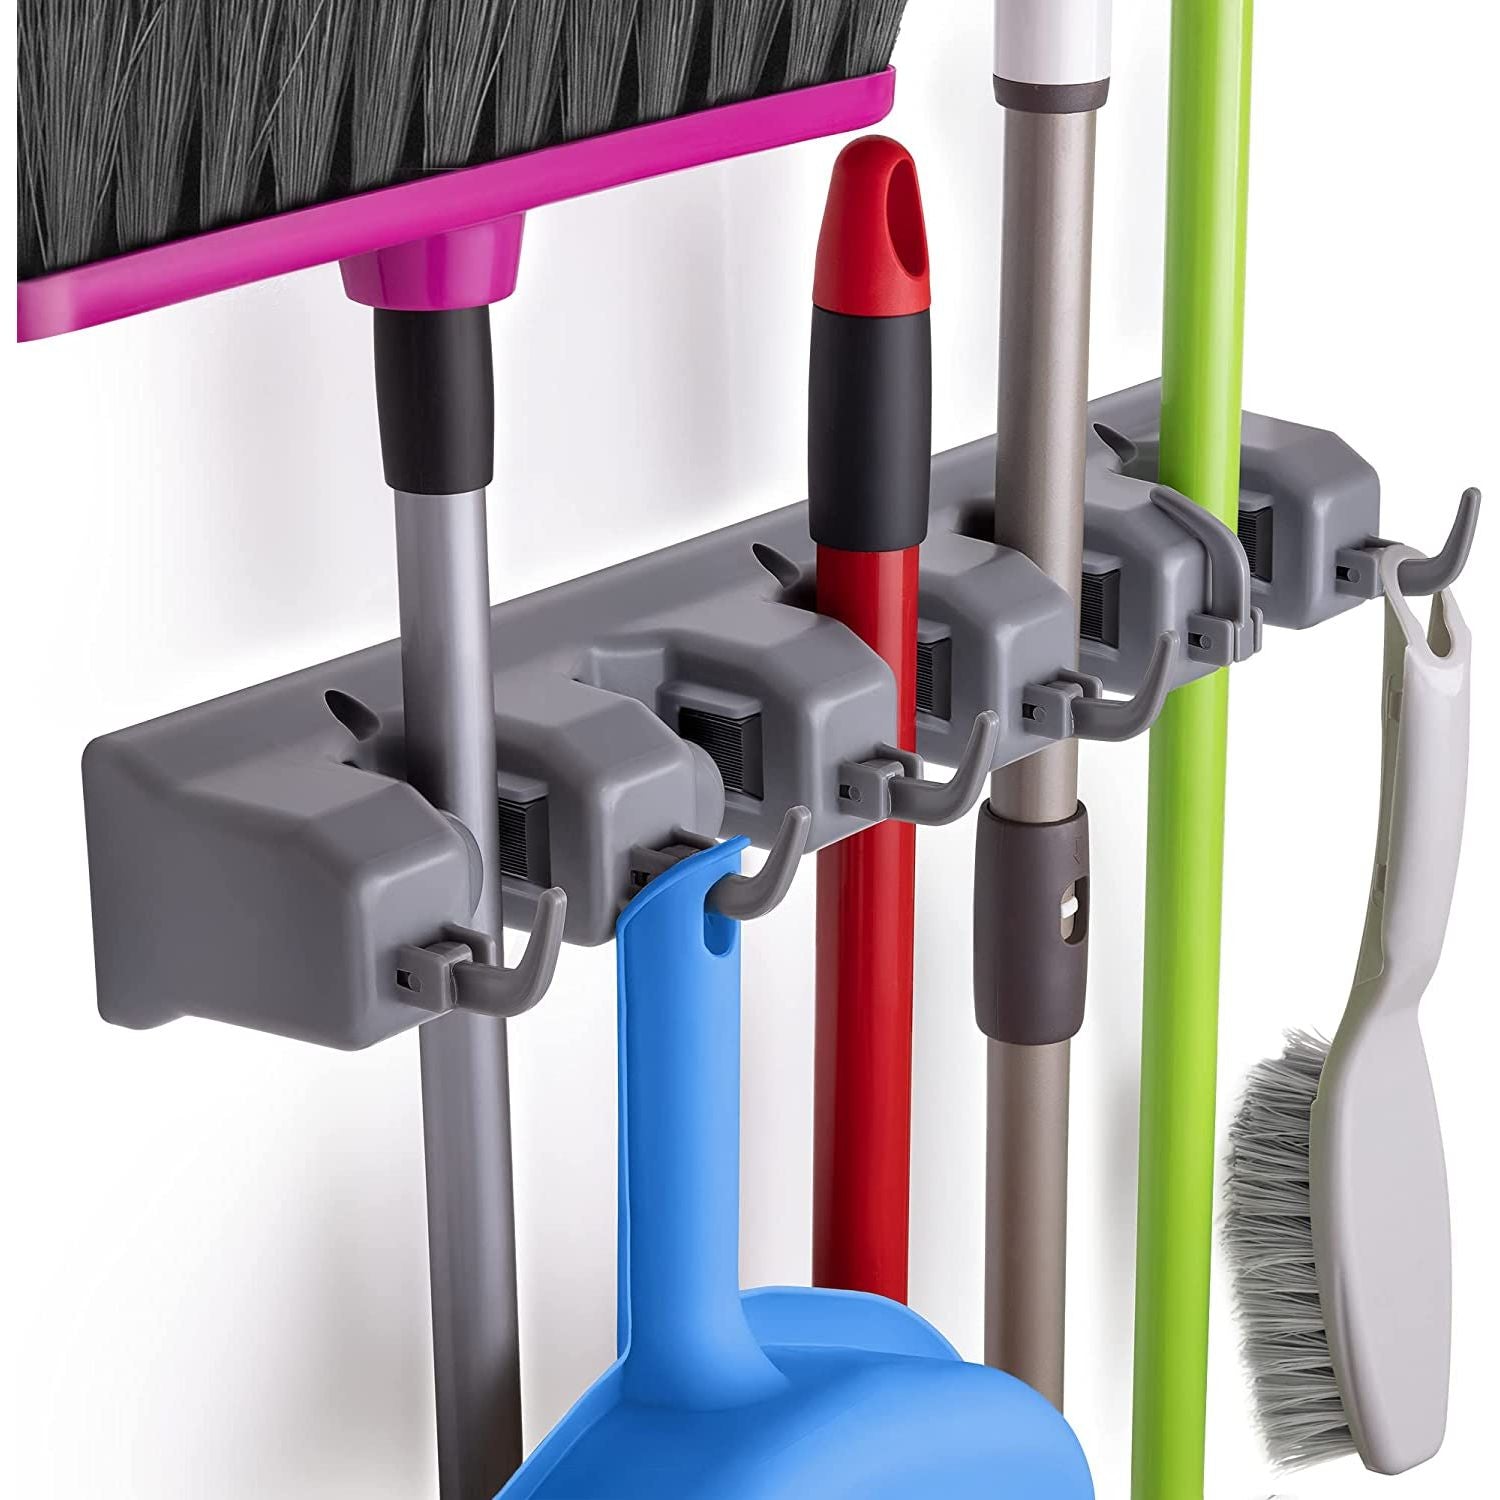 Mop and Broom Organizer Wall Mount – Holds Up to 50 lbs of Weight - Versatile Equipment Holder